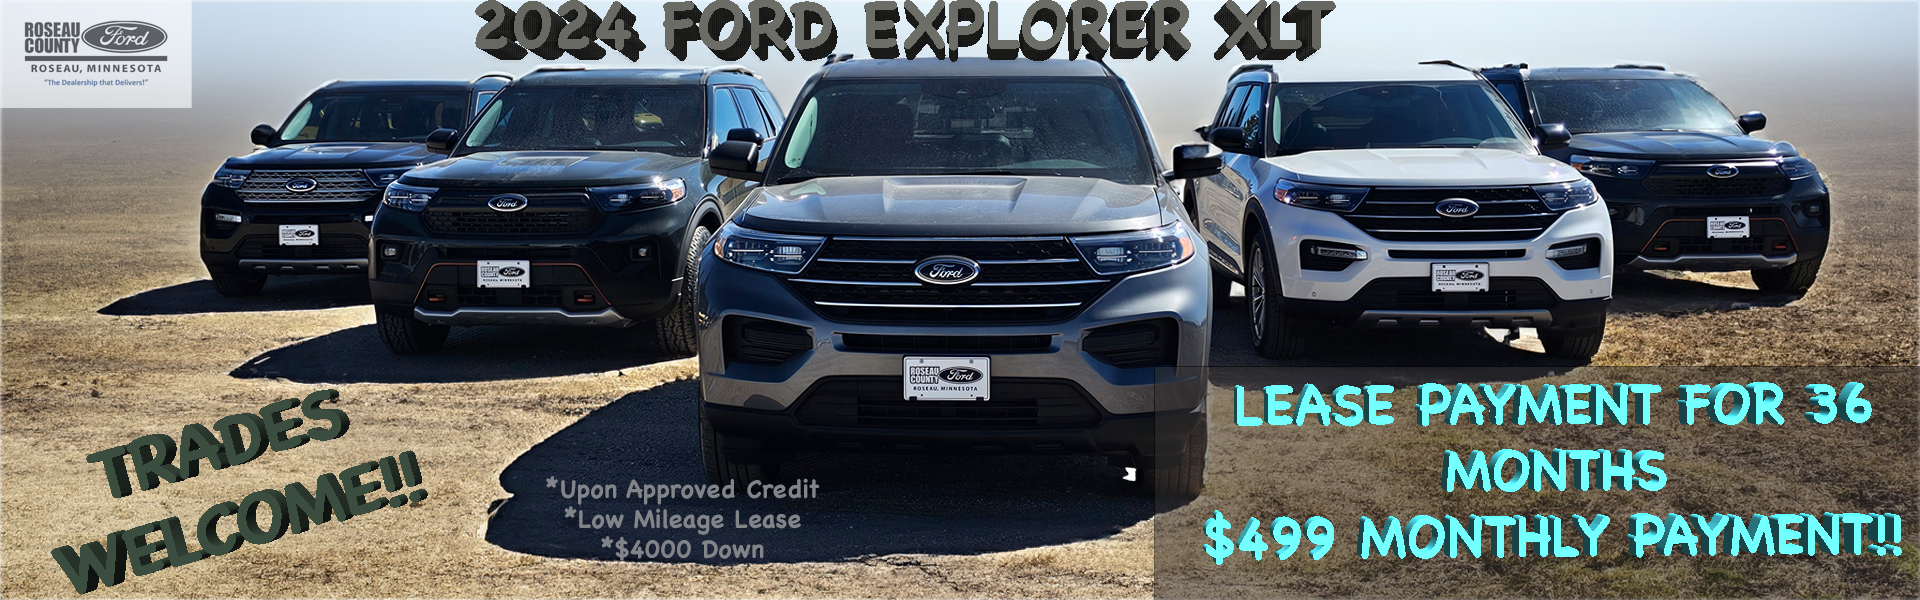 2024 Ford Explorer XLR Lease 36 mos for $499 per month